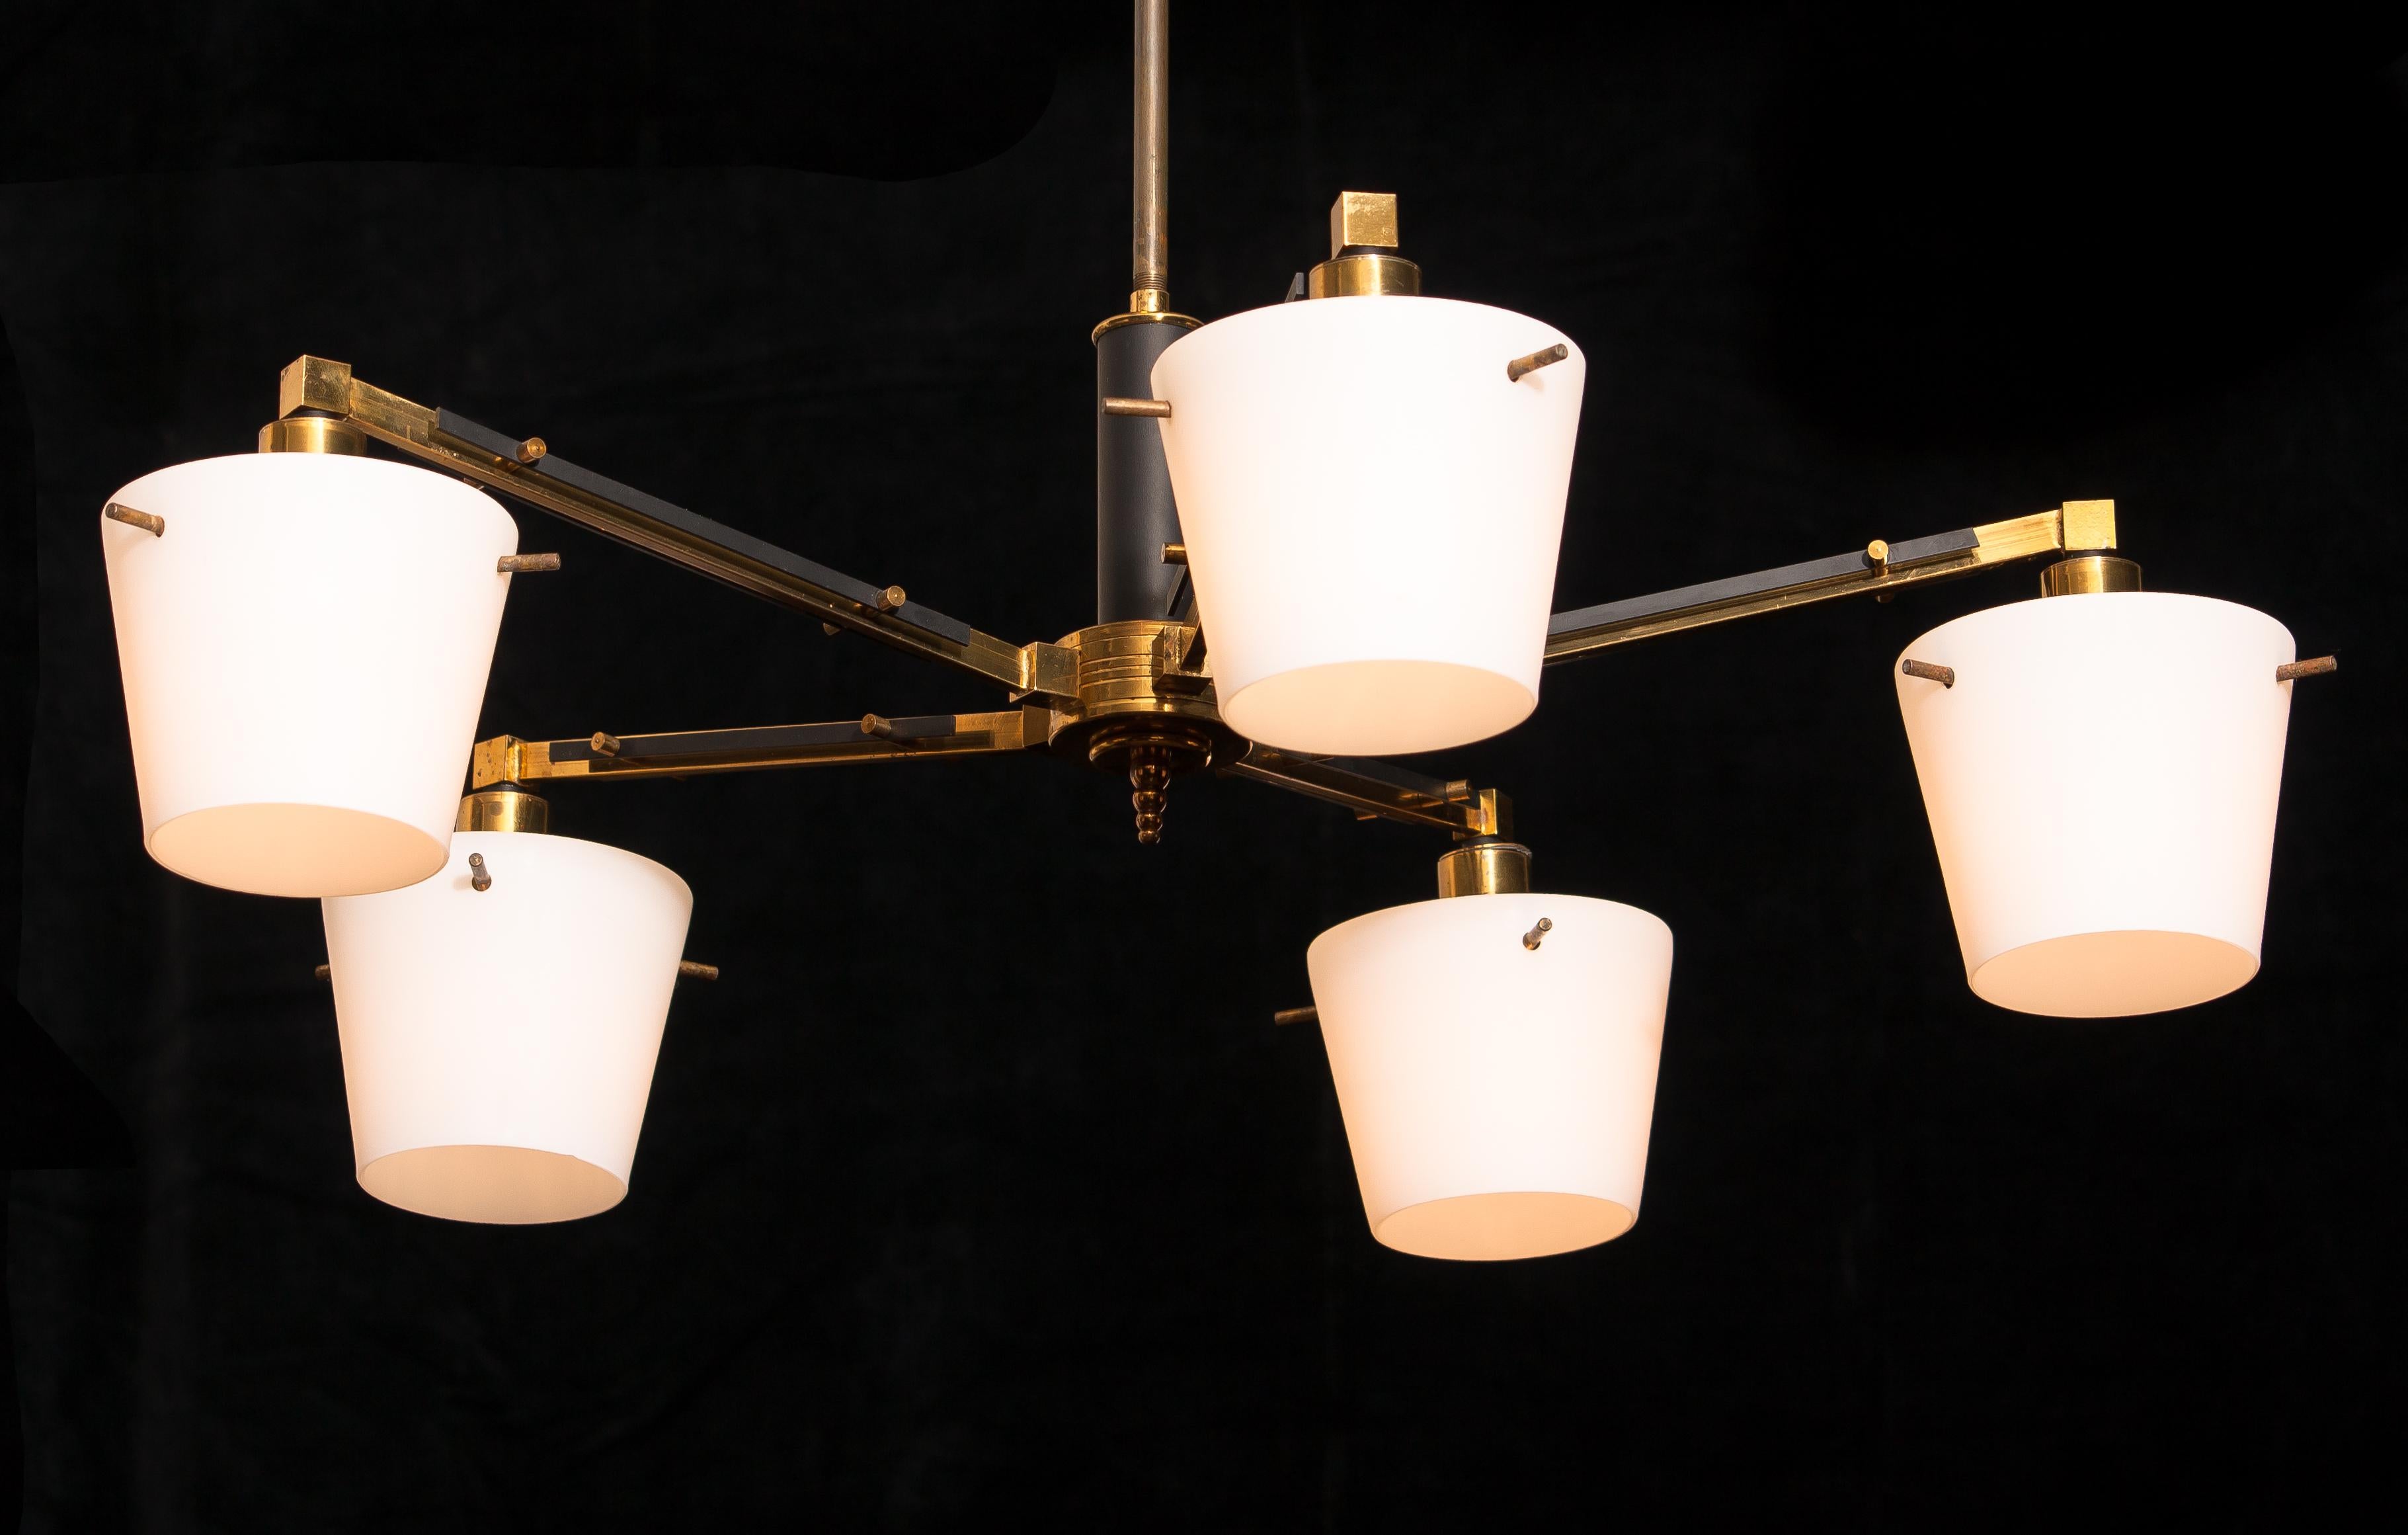 Italian 1950s, Brass Chandelier with Frosted with Glass Shades by Stilnovo, Italy